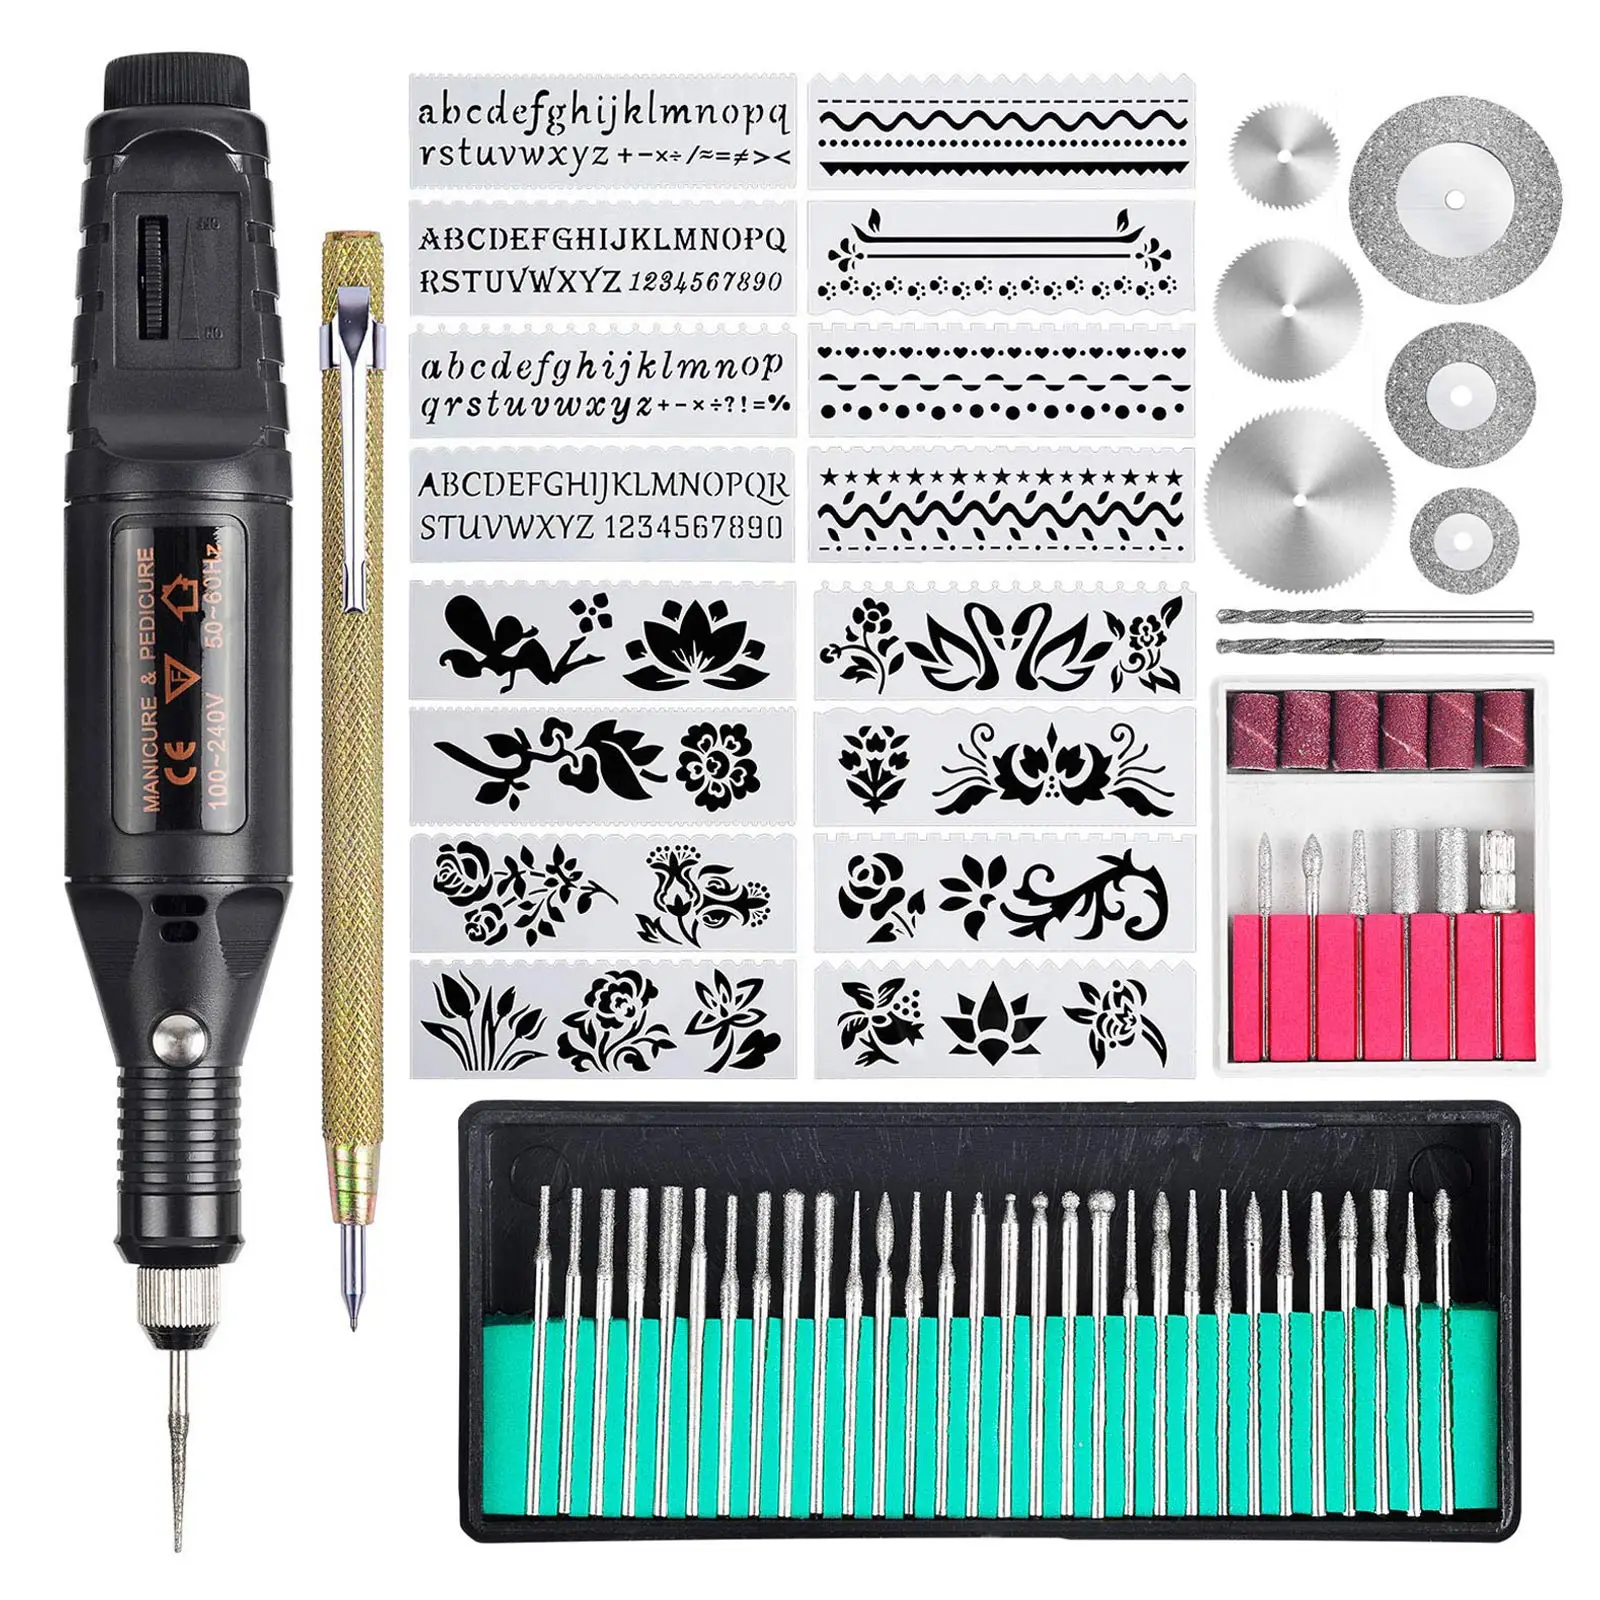 70Pcs Engraving Tool Kit Multifunctional Corded Engraver Pen DIY Rotary Tool for Jewelry Glass Wood Metal Electric Nail Art Dril electric jig saw 220v 750w multifunctional corded power cutter for wood metal and plastic woodworking household diy power tools